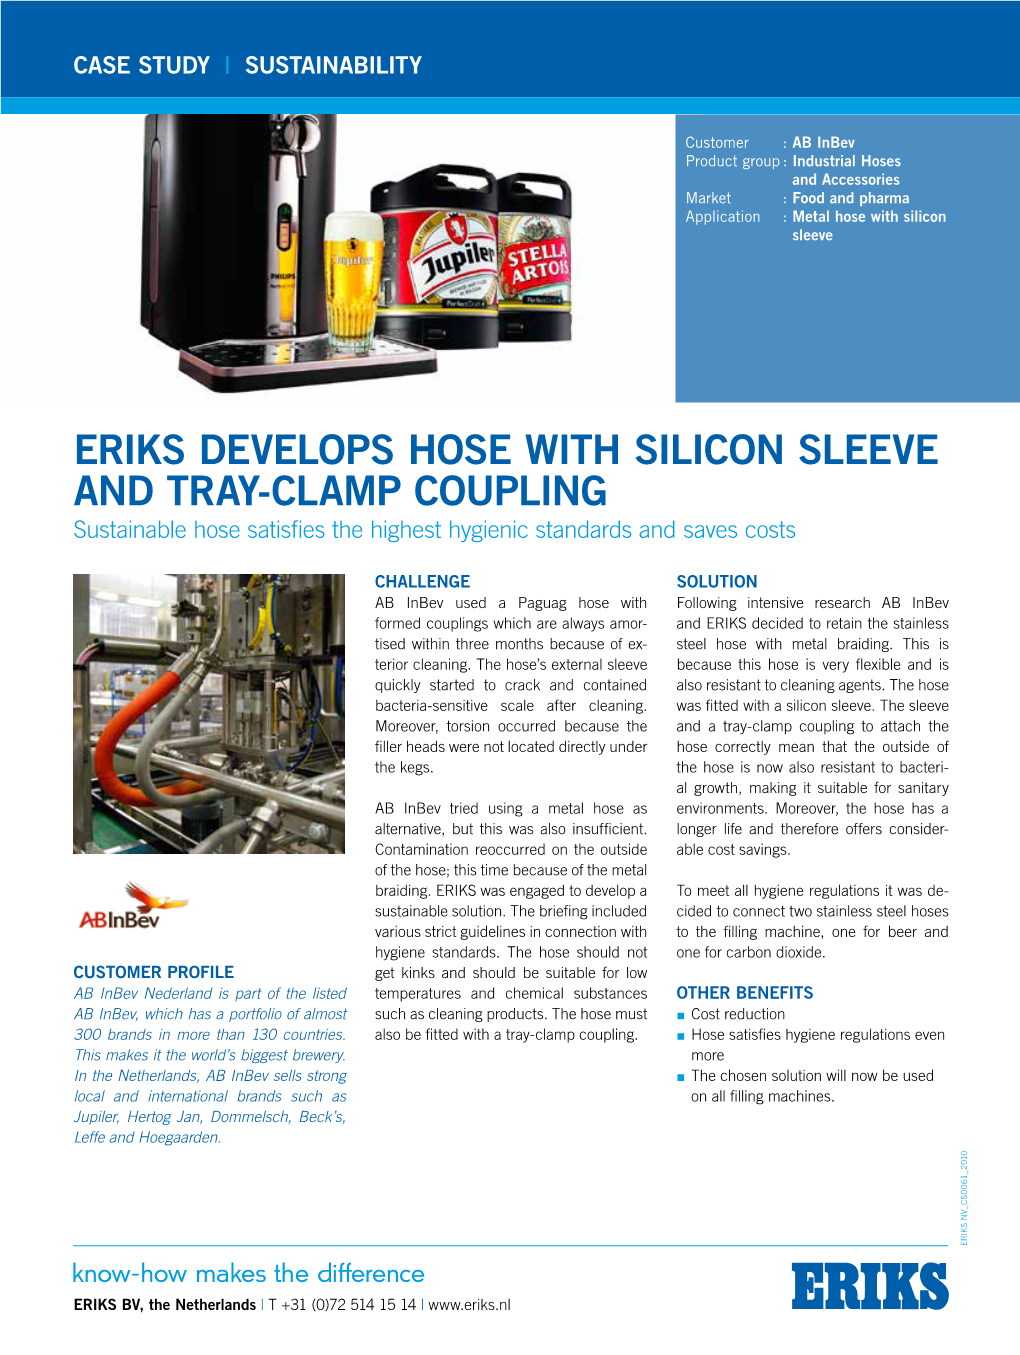 ERIKS DEVELOPS HOSE with SILICON SLEEVE and TRAY-CLAMP COUPLING Sustainable Hose Satisfies the Highest Hygienic Standards and Saves Costs